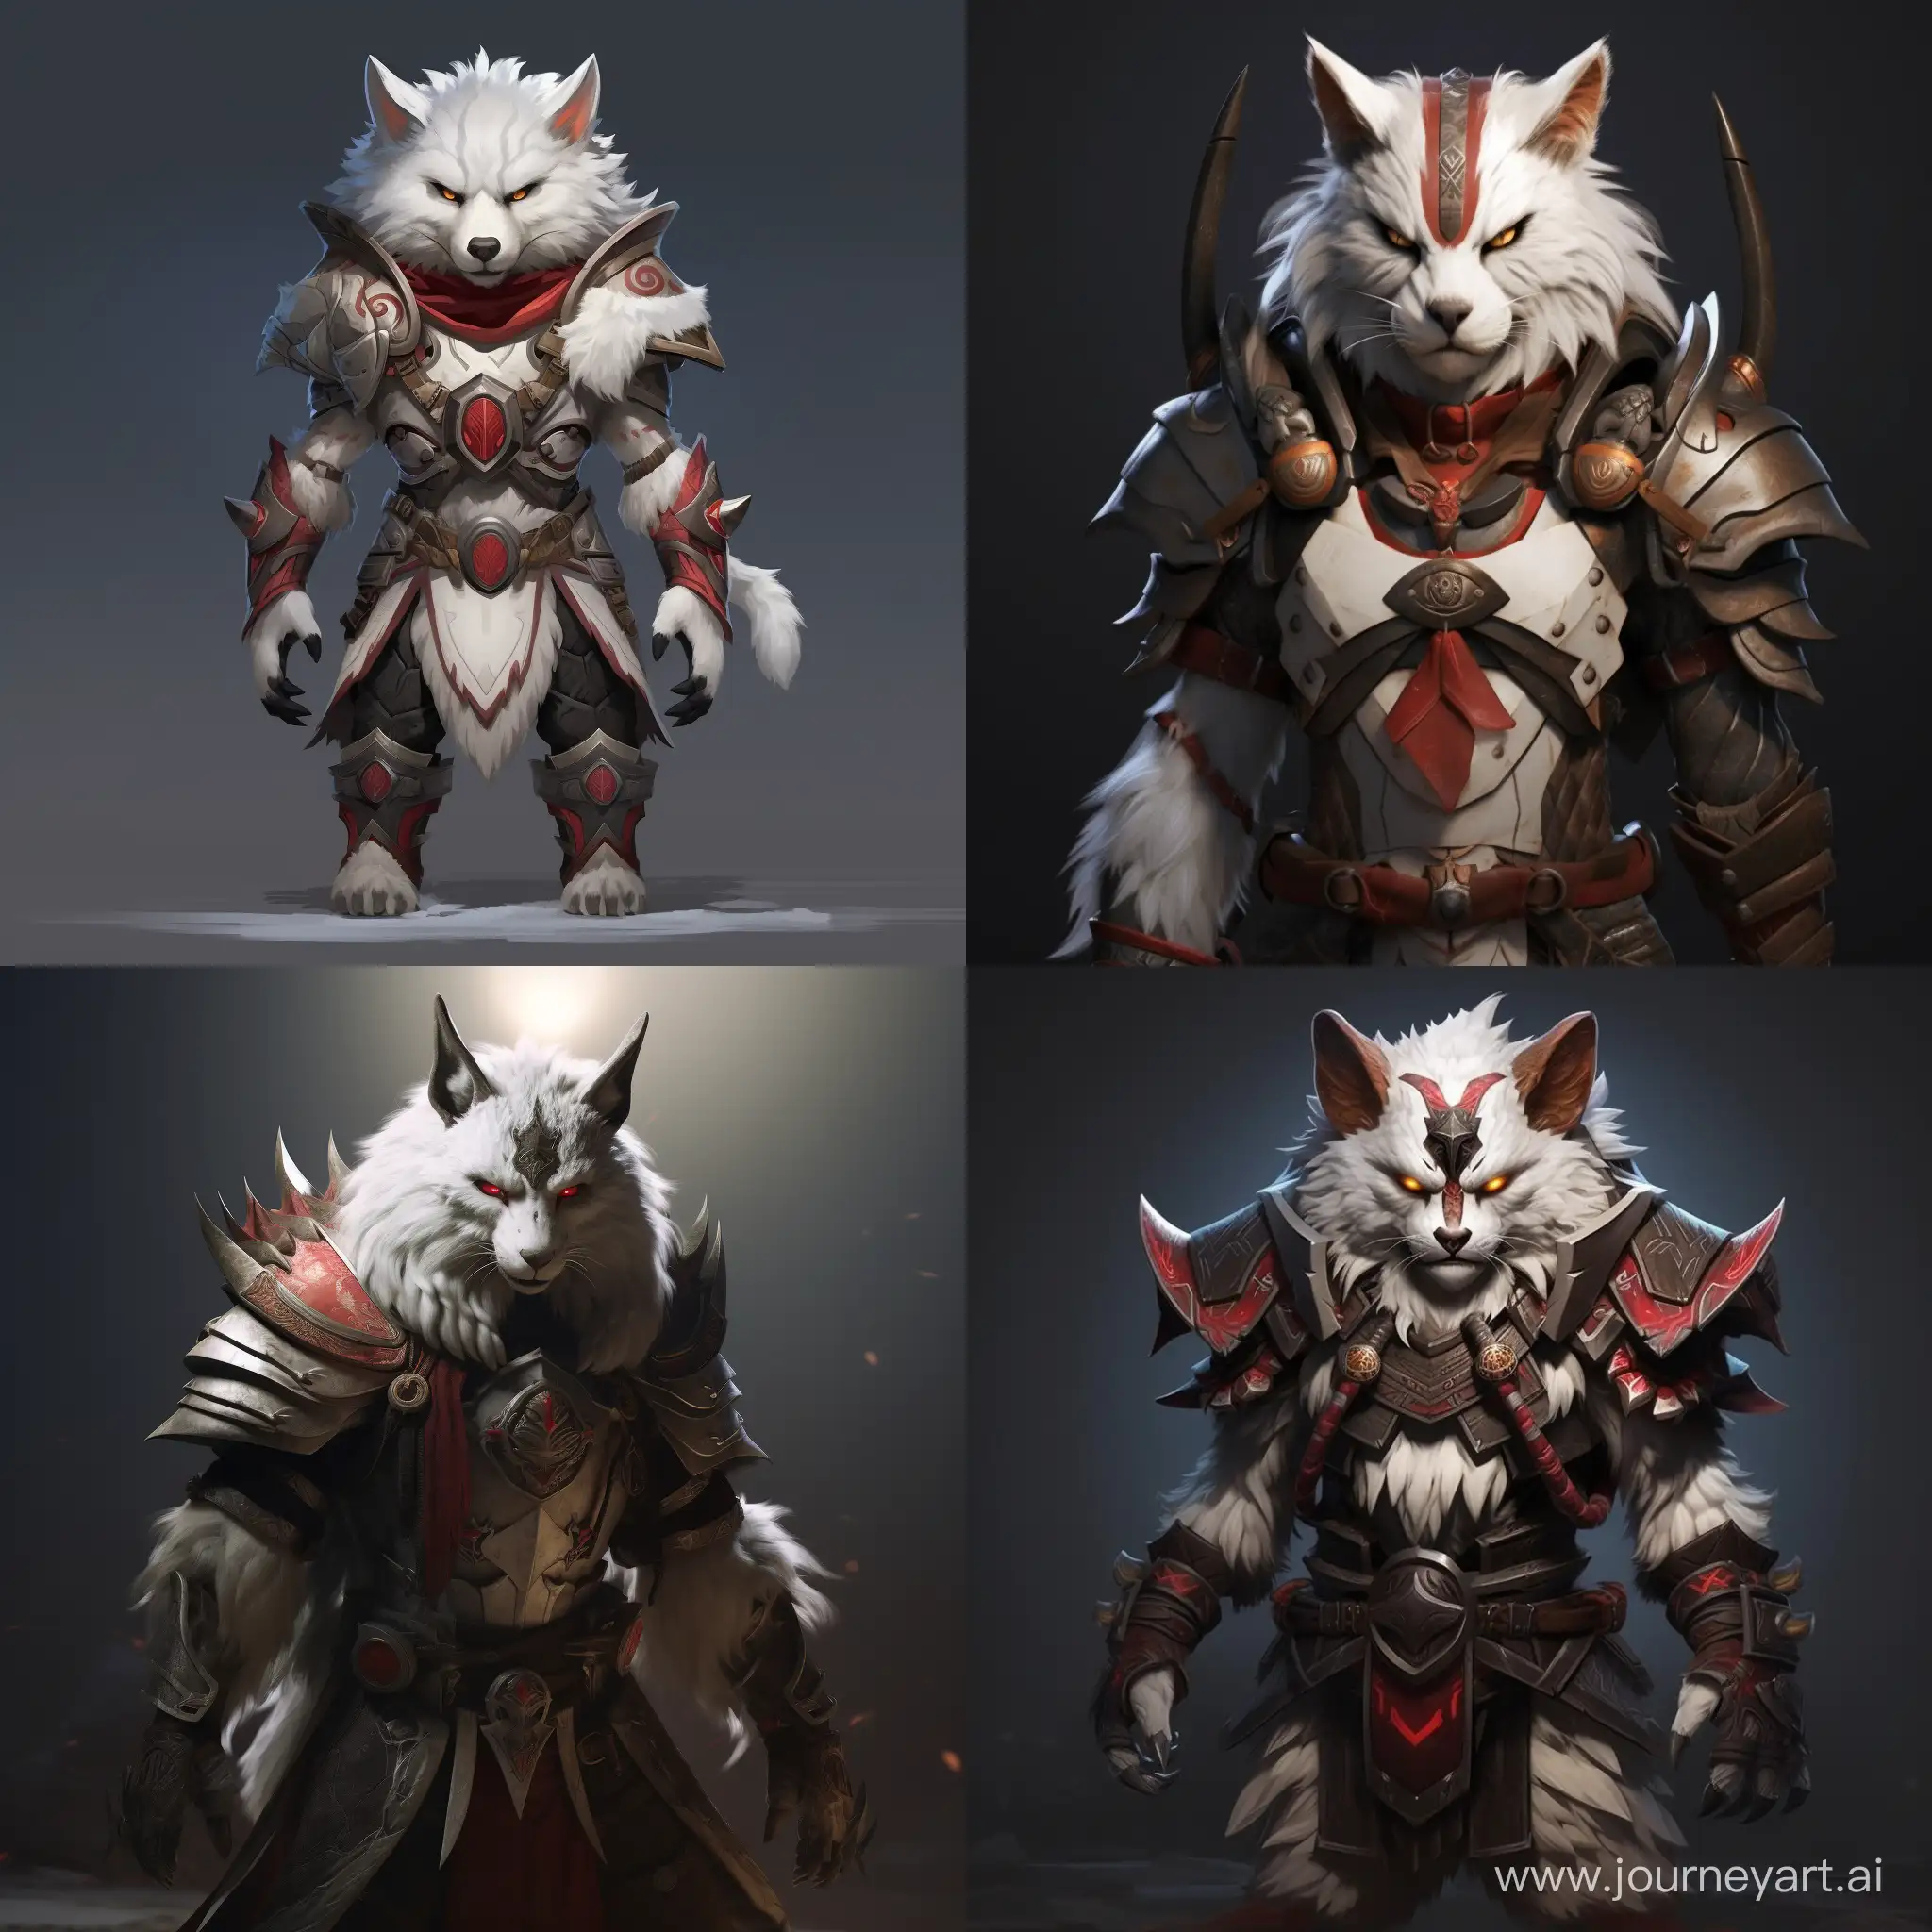 Vulpera-Warrior-in-Striking-White-Fur-and-Fiery-Eyes-with-Leather-Armor